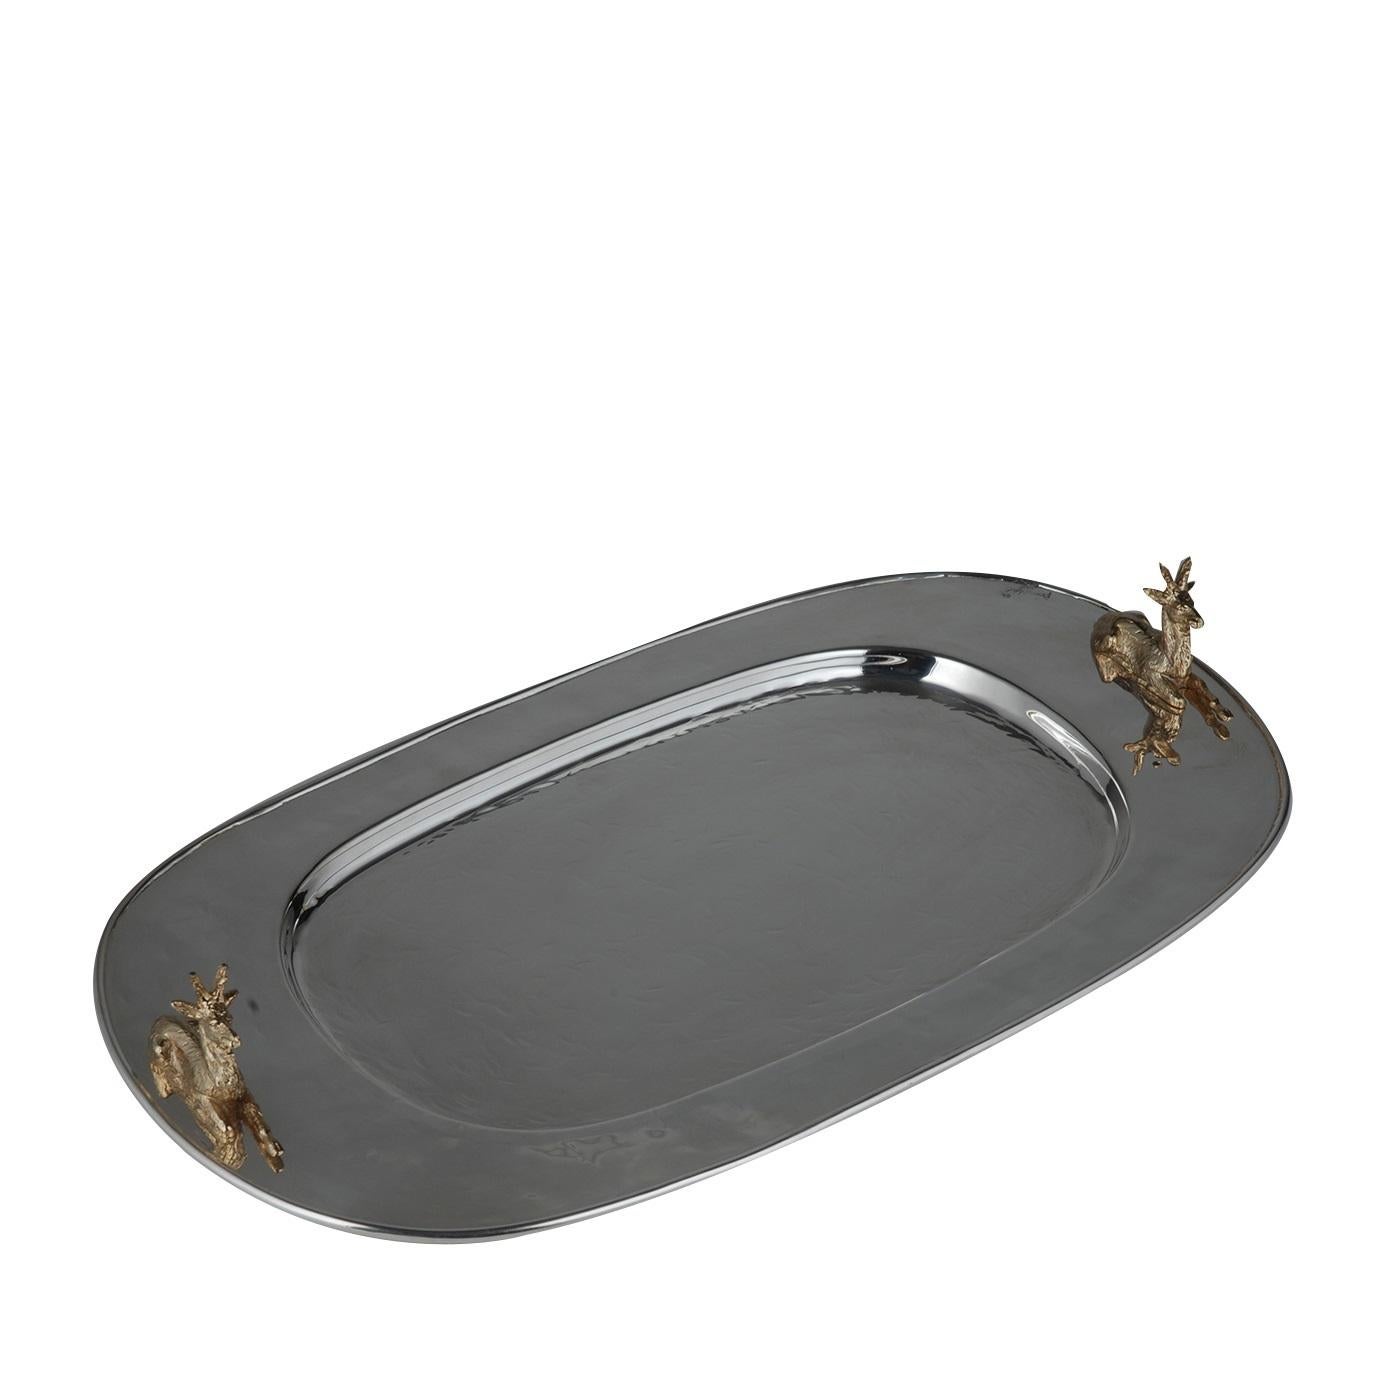 This exquisite oval tray is made entirely of metal plated in silver and its surface is lightly textured to give it an organic feel. The gentle curves of the inner and outer profile are sophisticated and elegant, while the finish of the two deer